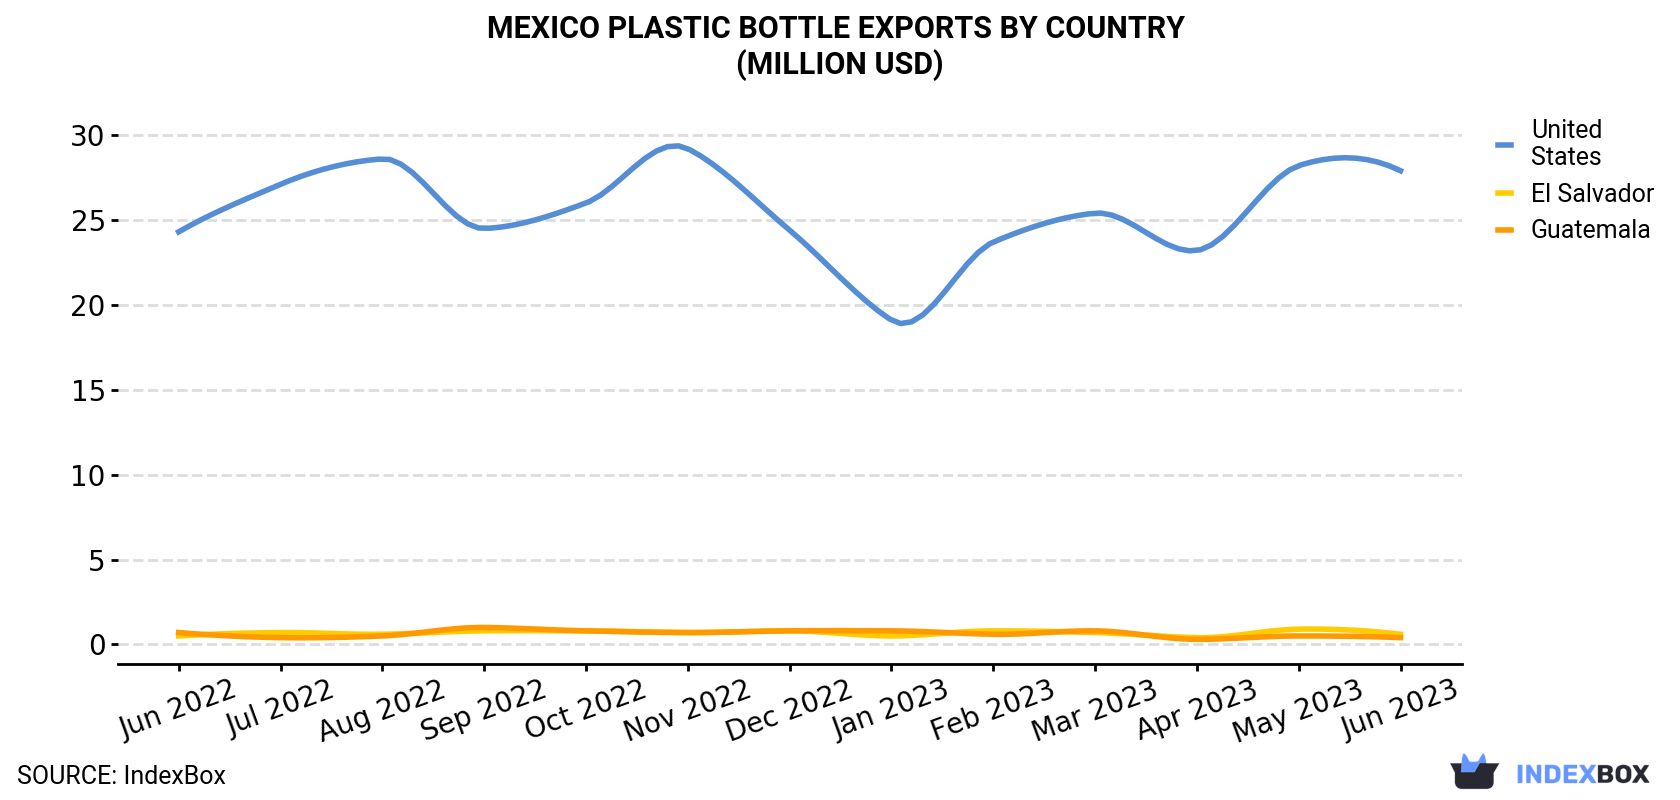 Mexico Plastic Bottle Exports By Country (Million USD)